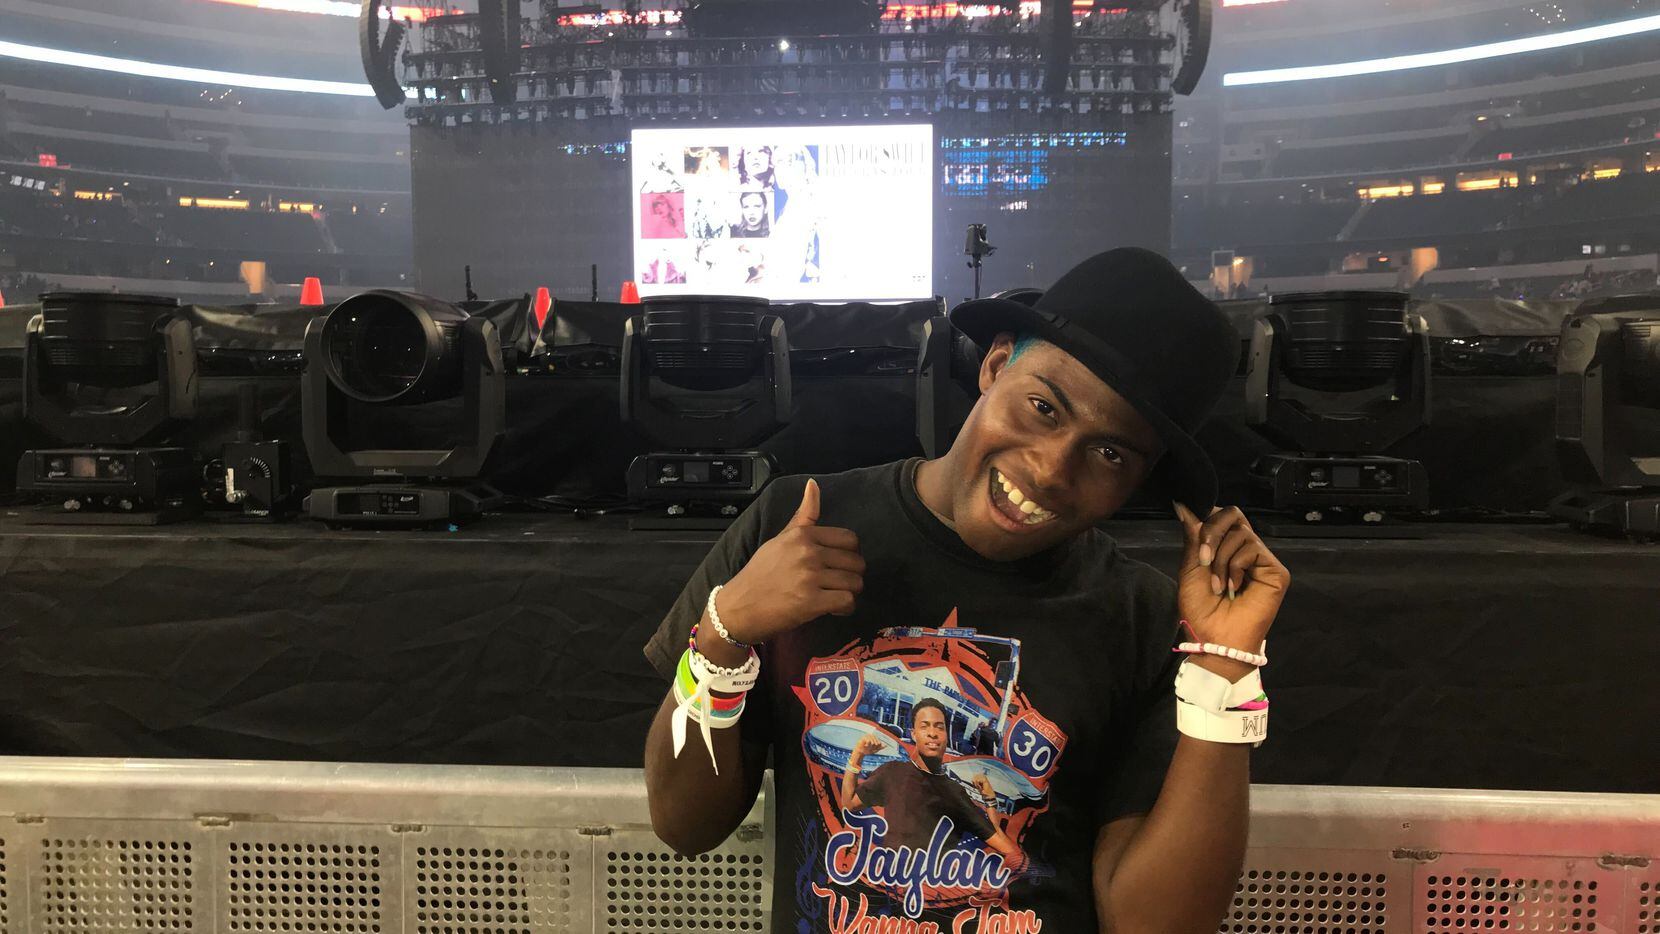 Jaylan Ford, a Taylor Swift super fan from Arlington, was gifted a signed "22" hat by Swift...